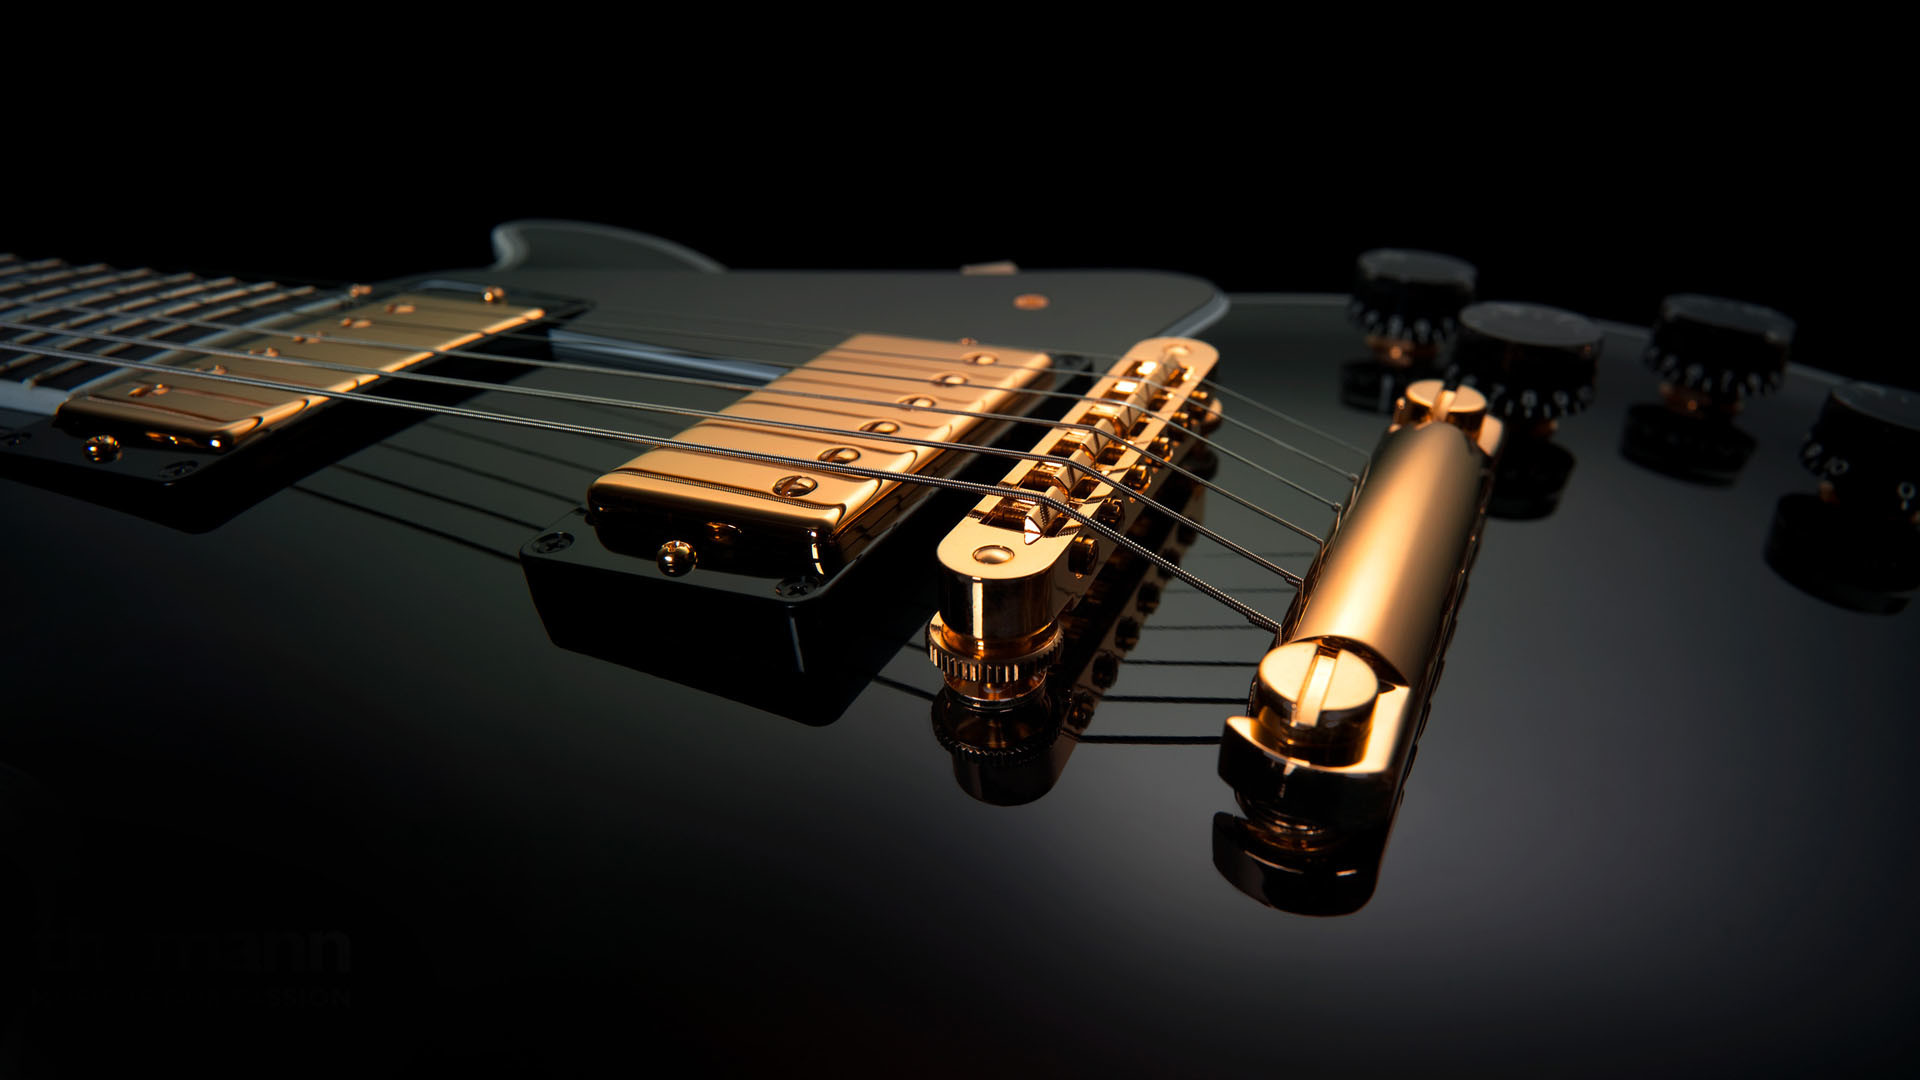 Gibson Guitar Wallpapers 7826 Hd Wallpapers in Music – Imagesci.com